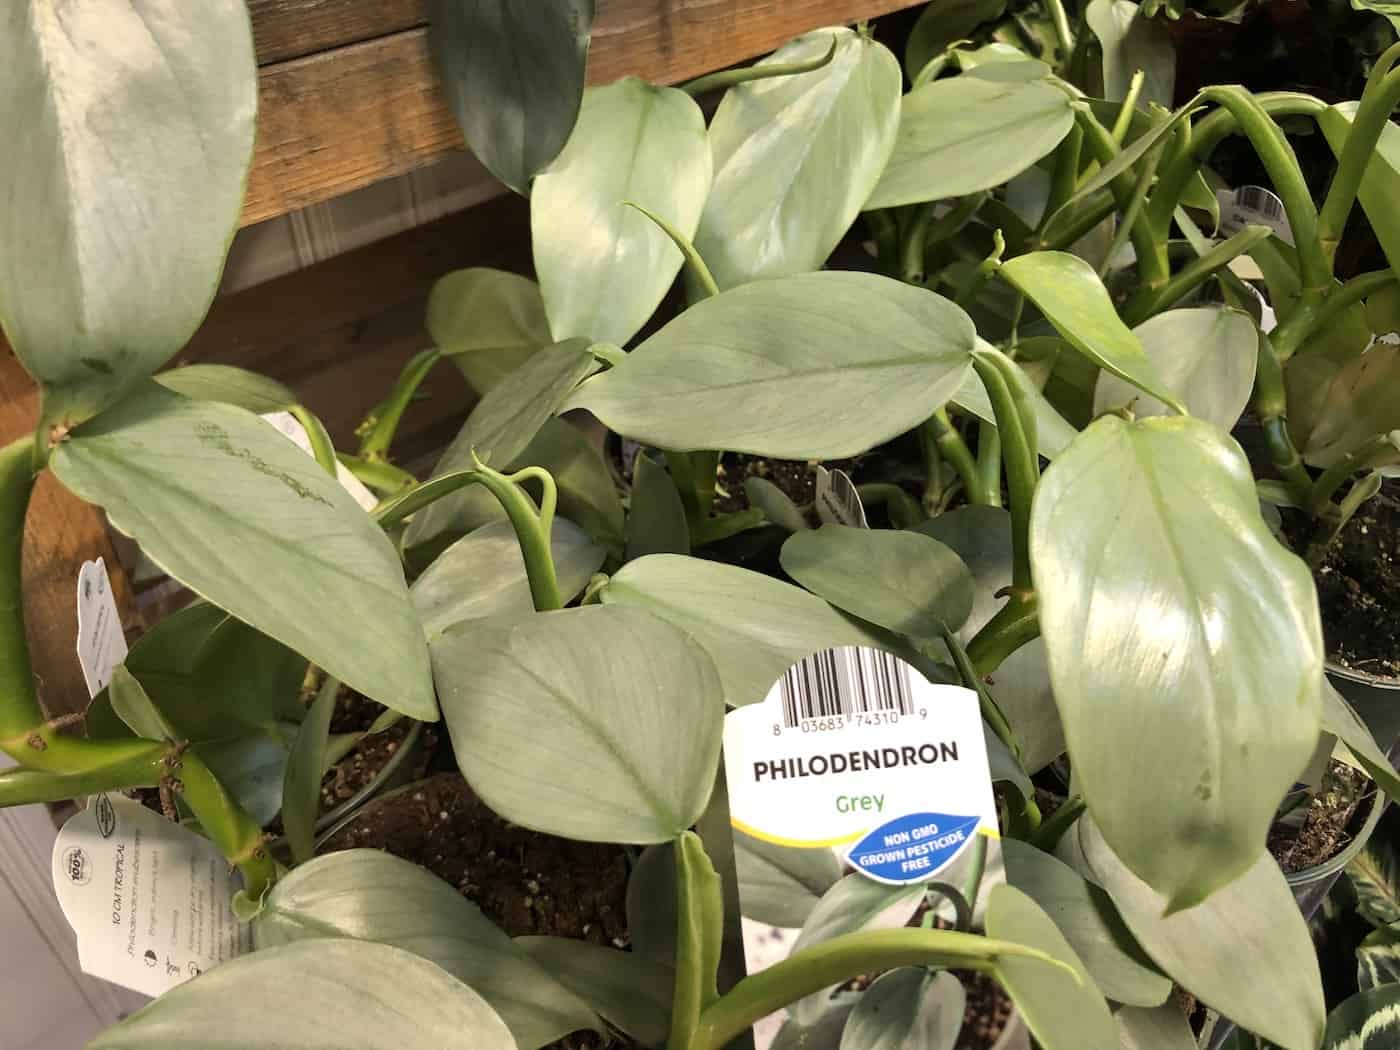 Grey philodendron